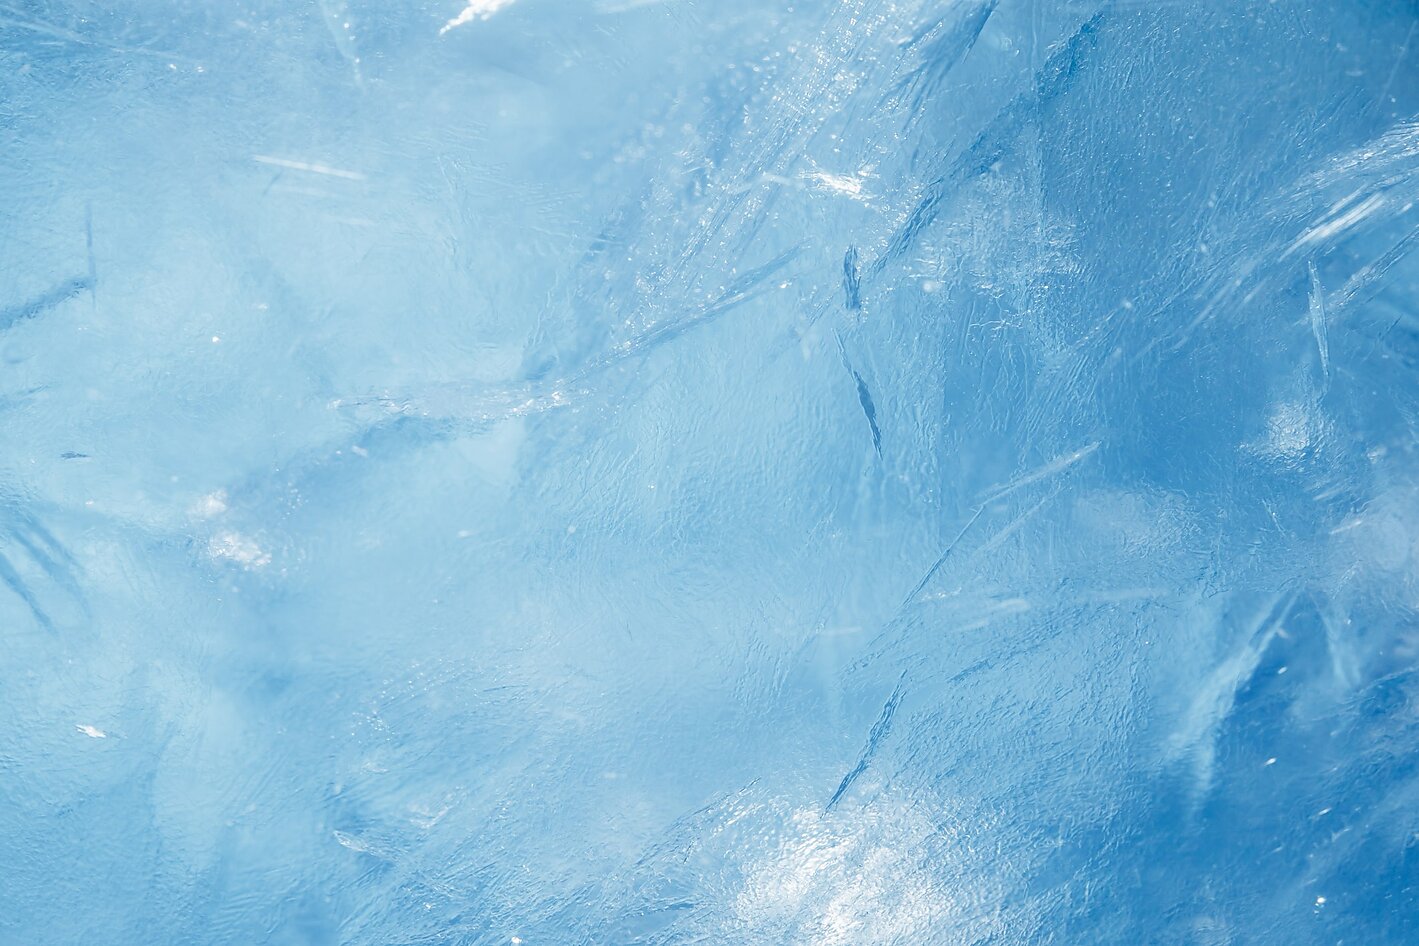 A sheet of ice